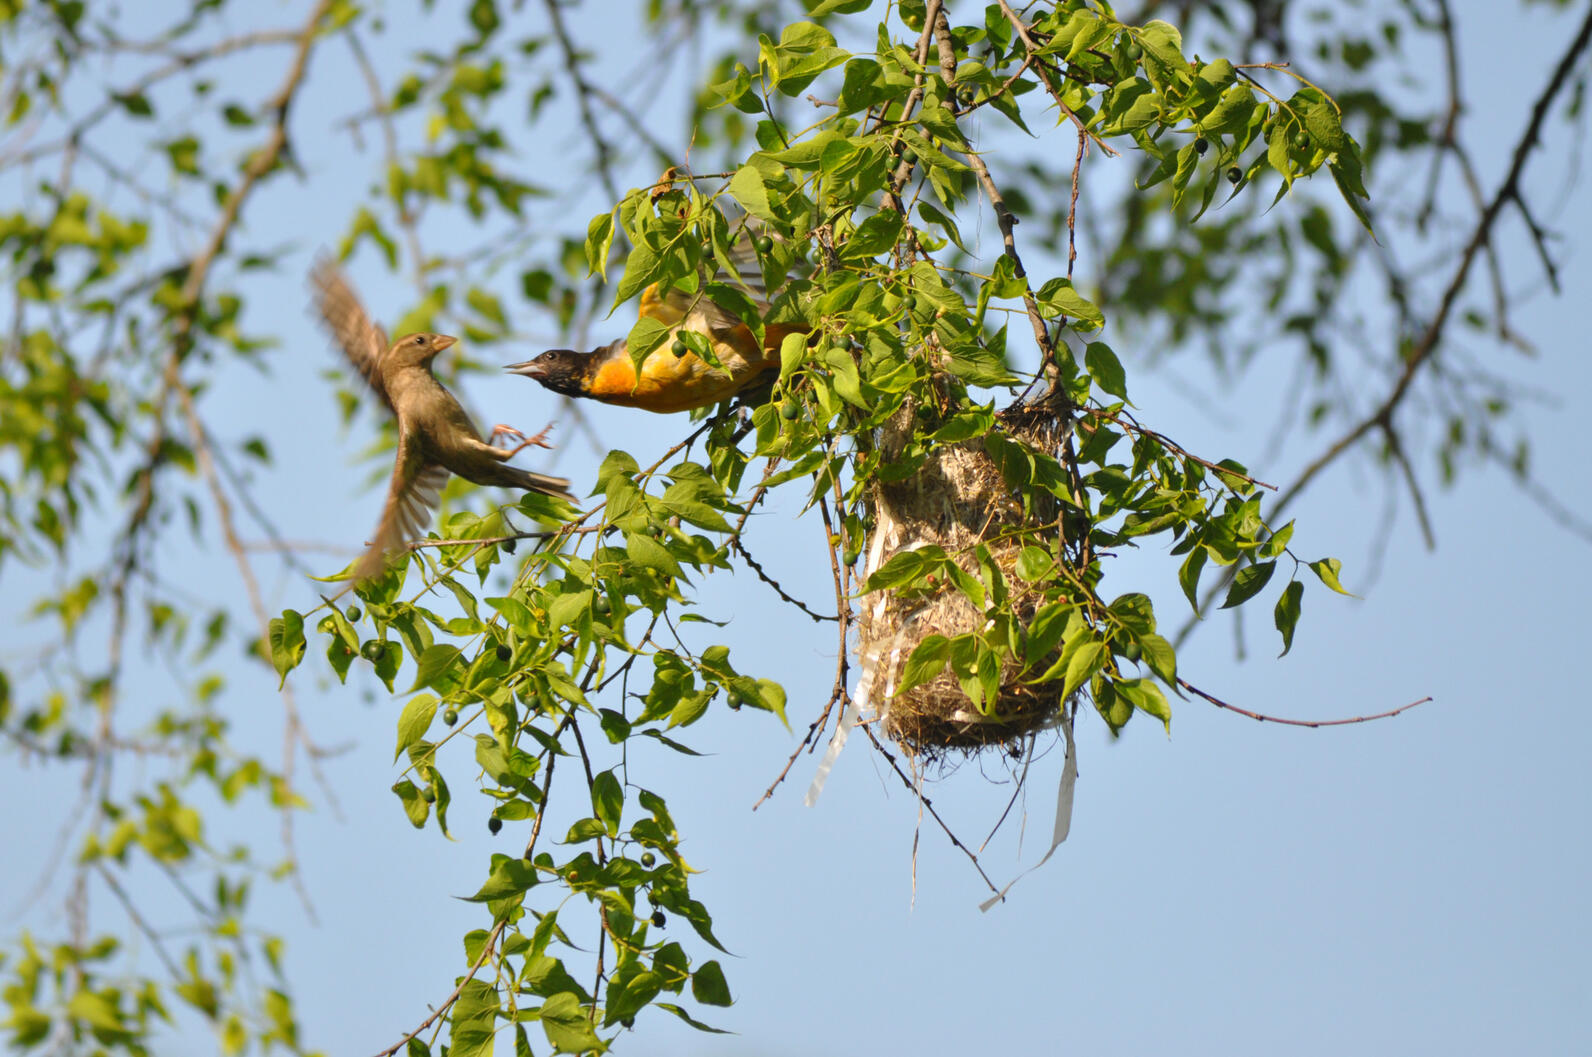 Two birds interact next to a hanging basket nest made by a Baltimore Oriole on the end of a branch. He appears to be defending his nest against a House Sparrow that got too close. 